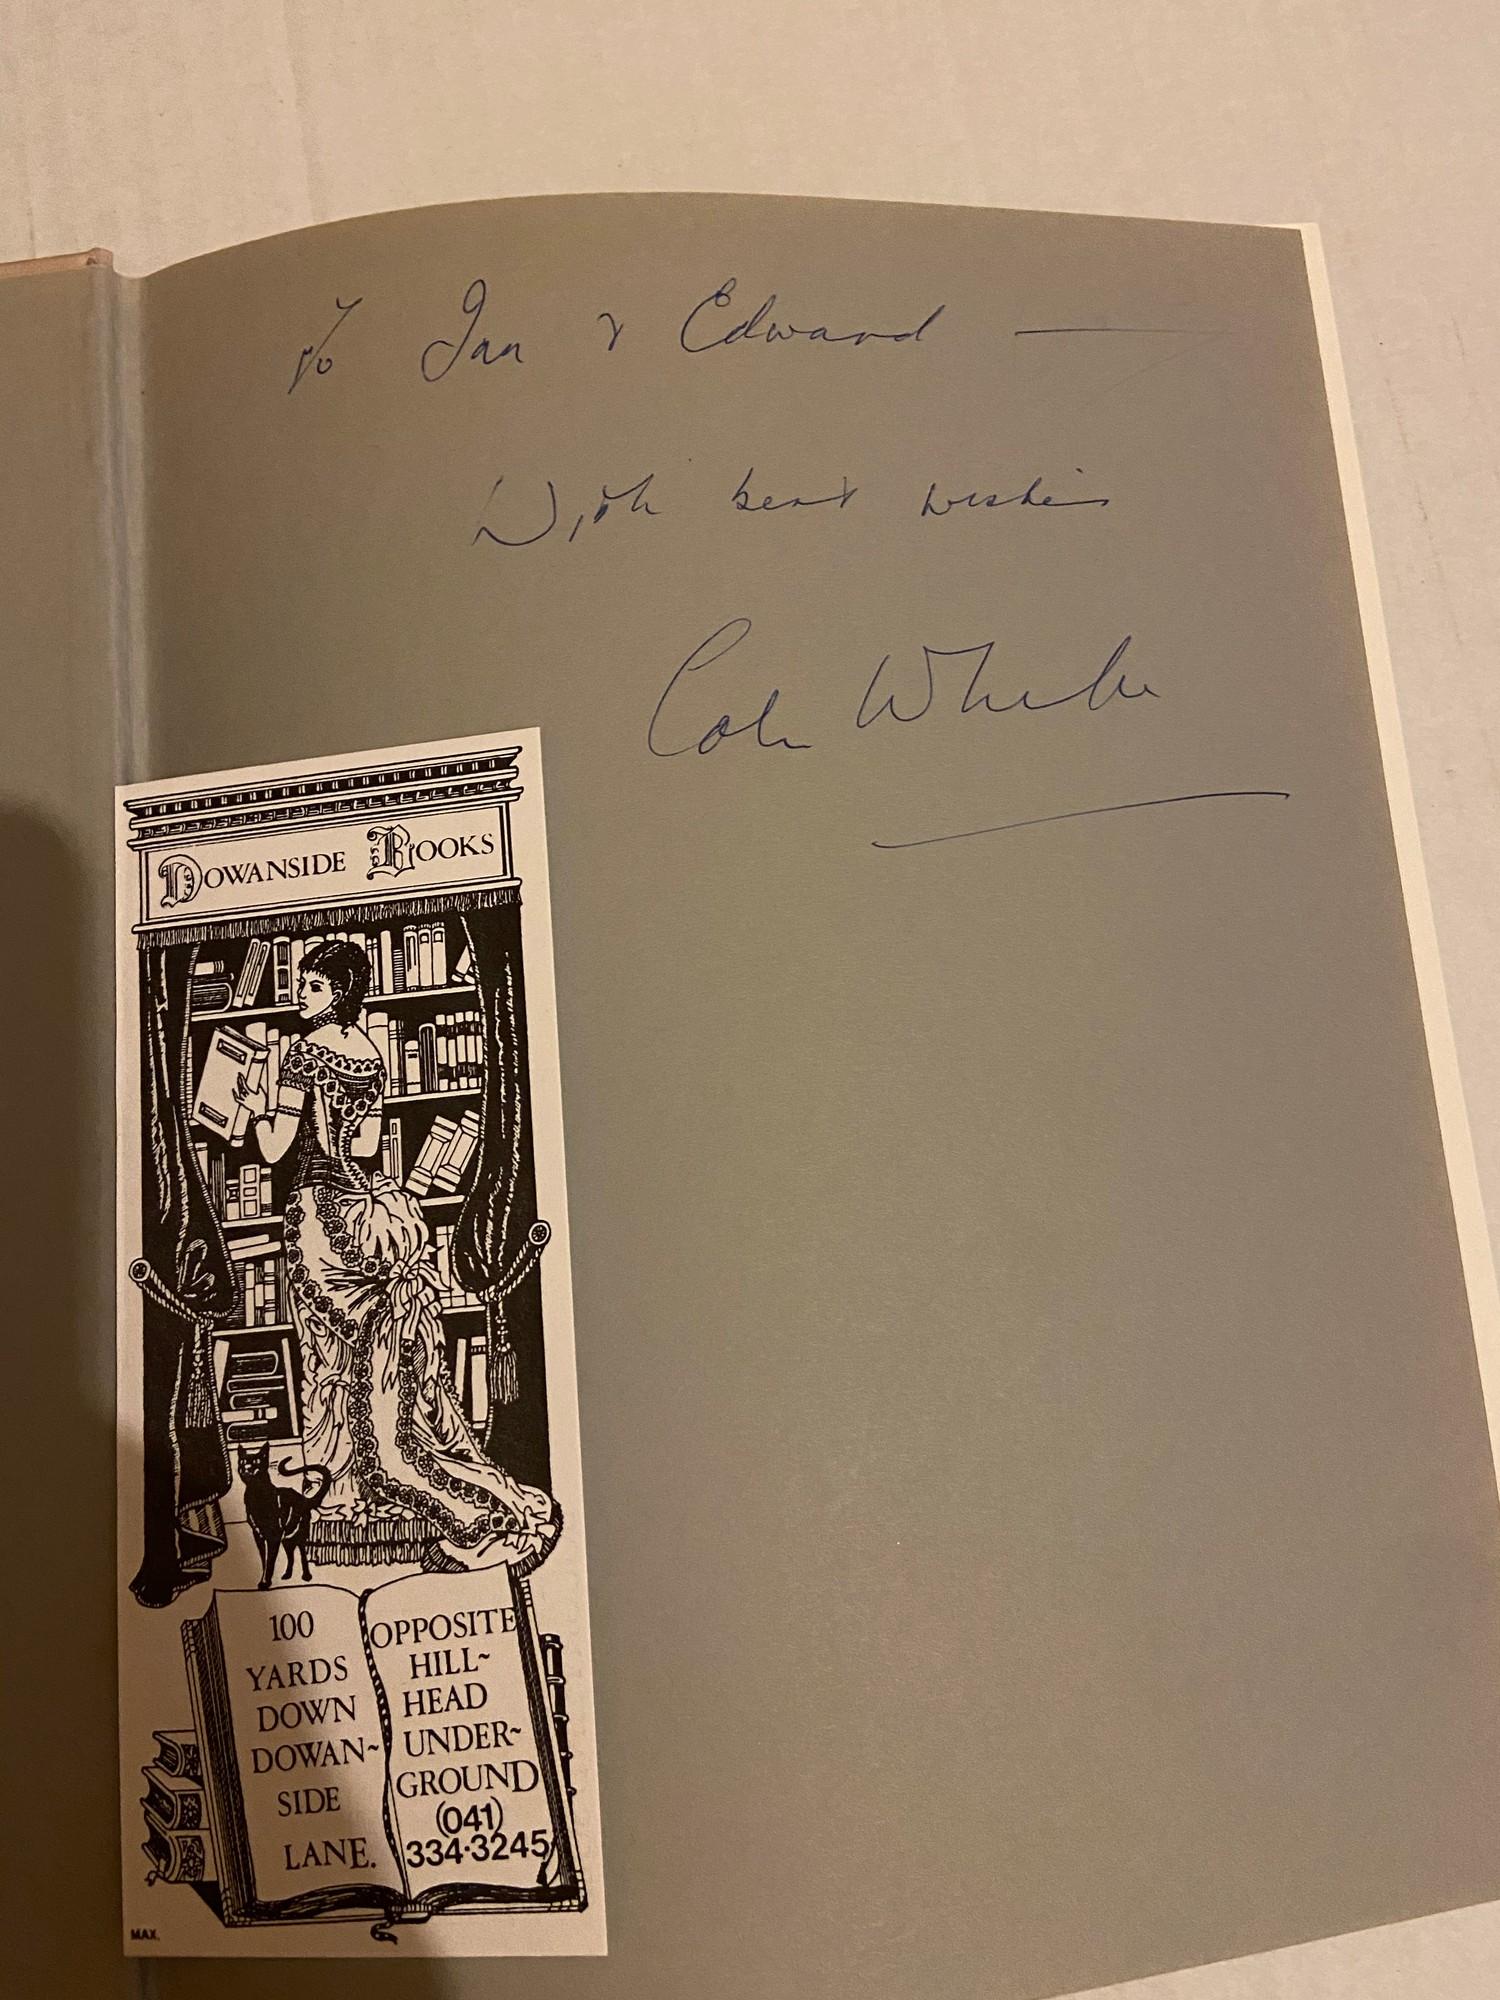 A Large novel titled 'The Enchanted World of Jessie M King' by Colin White. Inscribed by the author. - Image 7 of 7